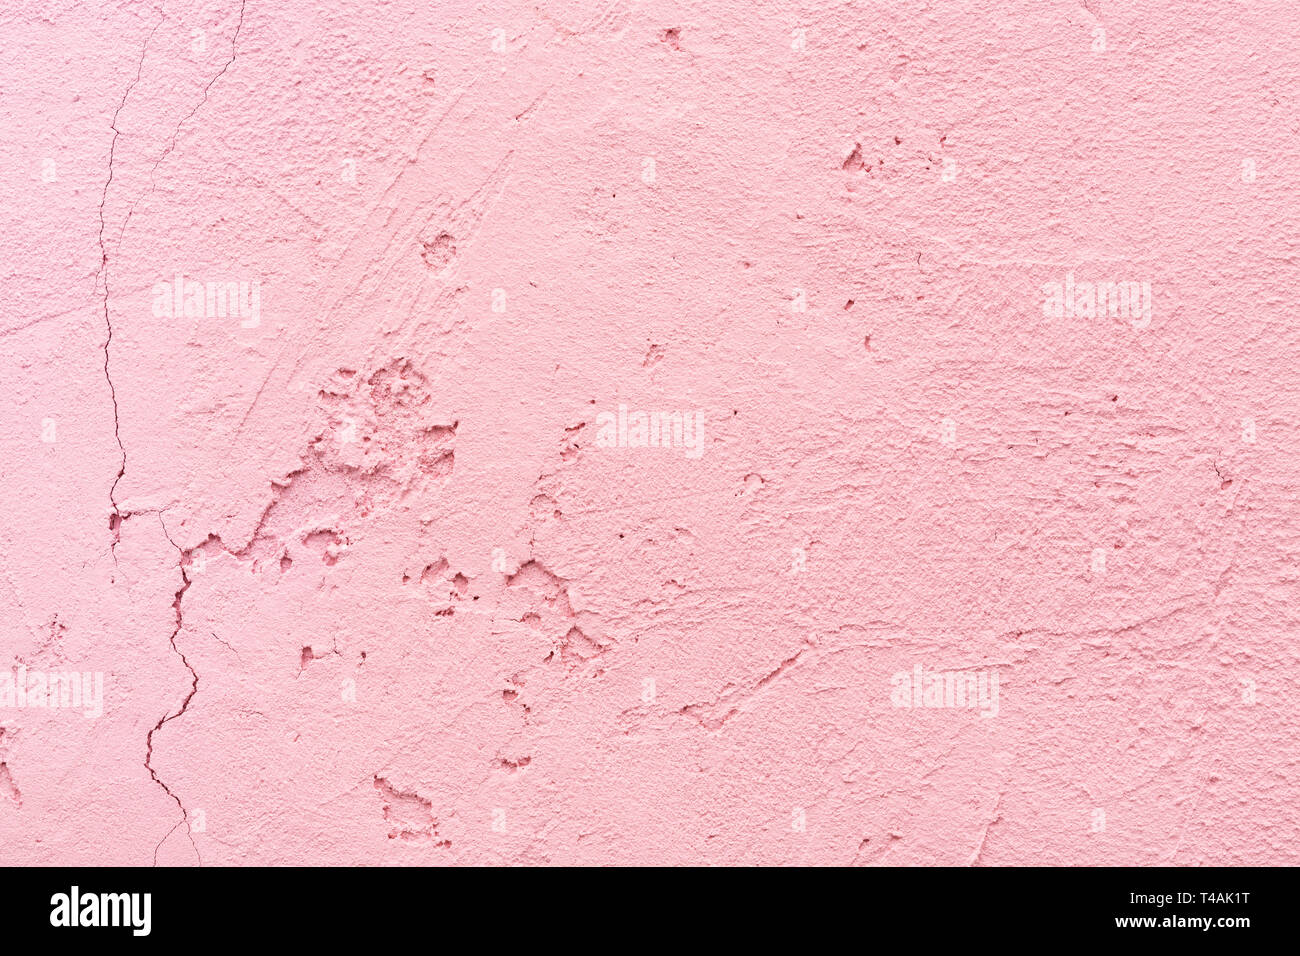 Cracked Texture Of Plaster Wall Pink Stucco Close Up